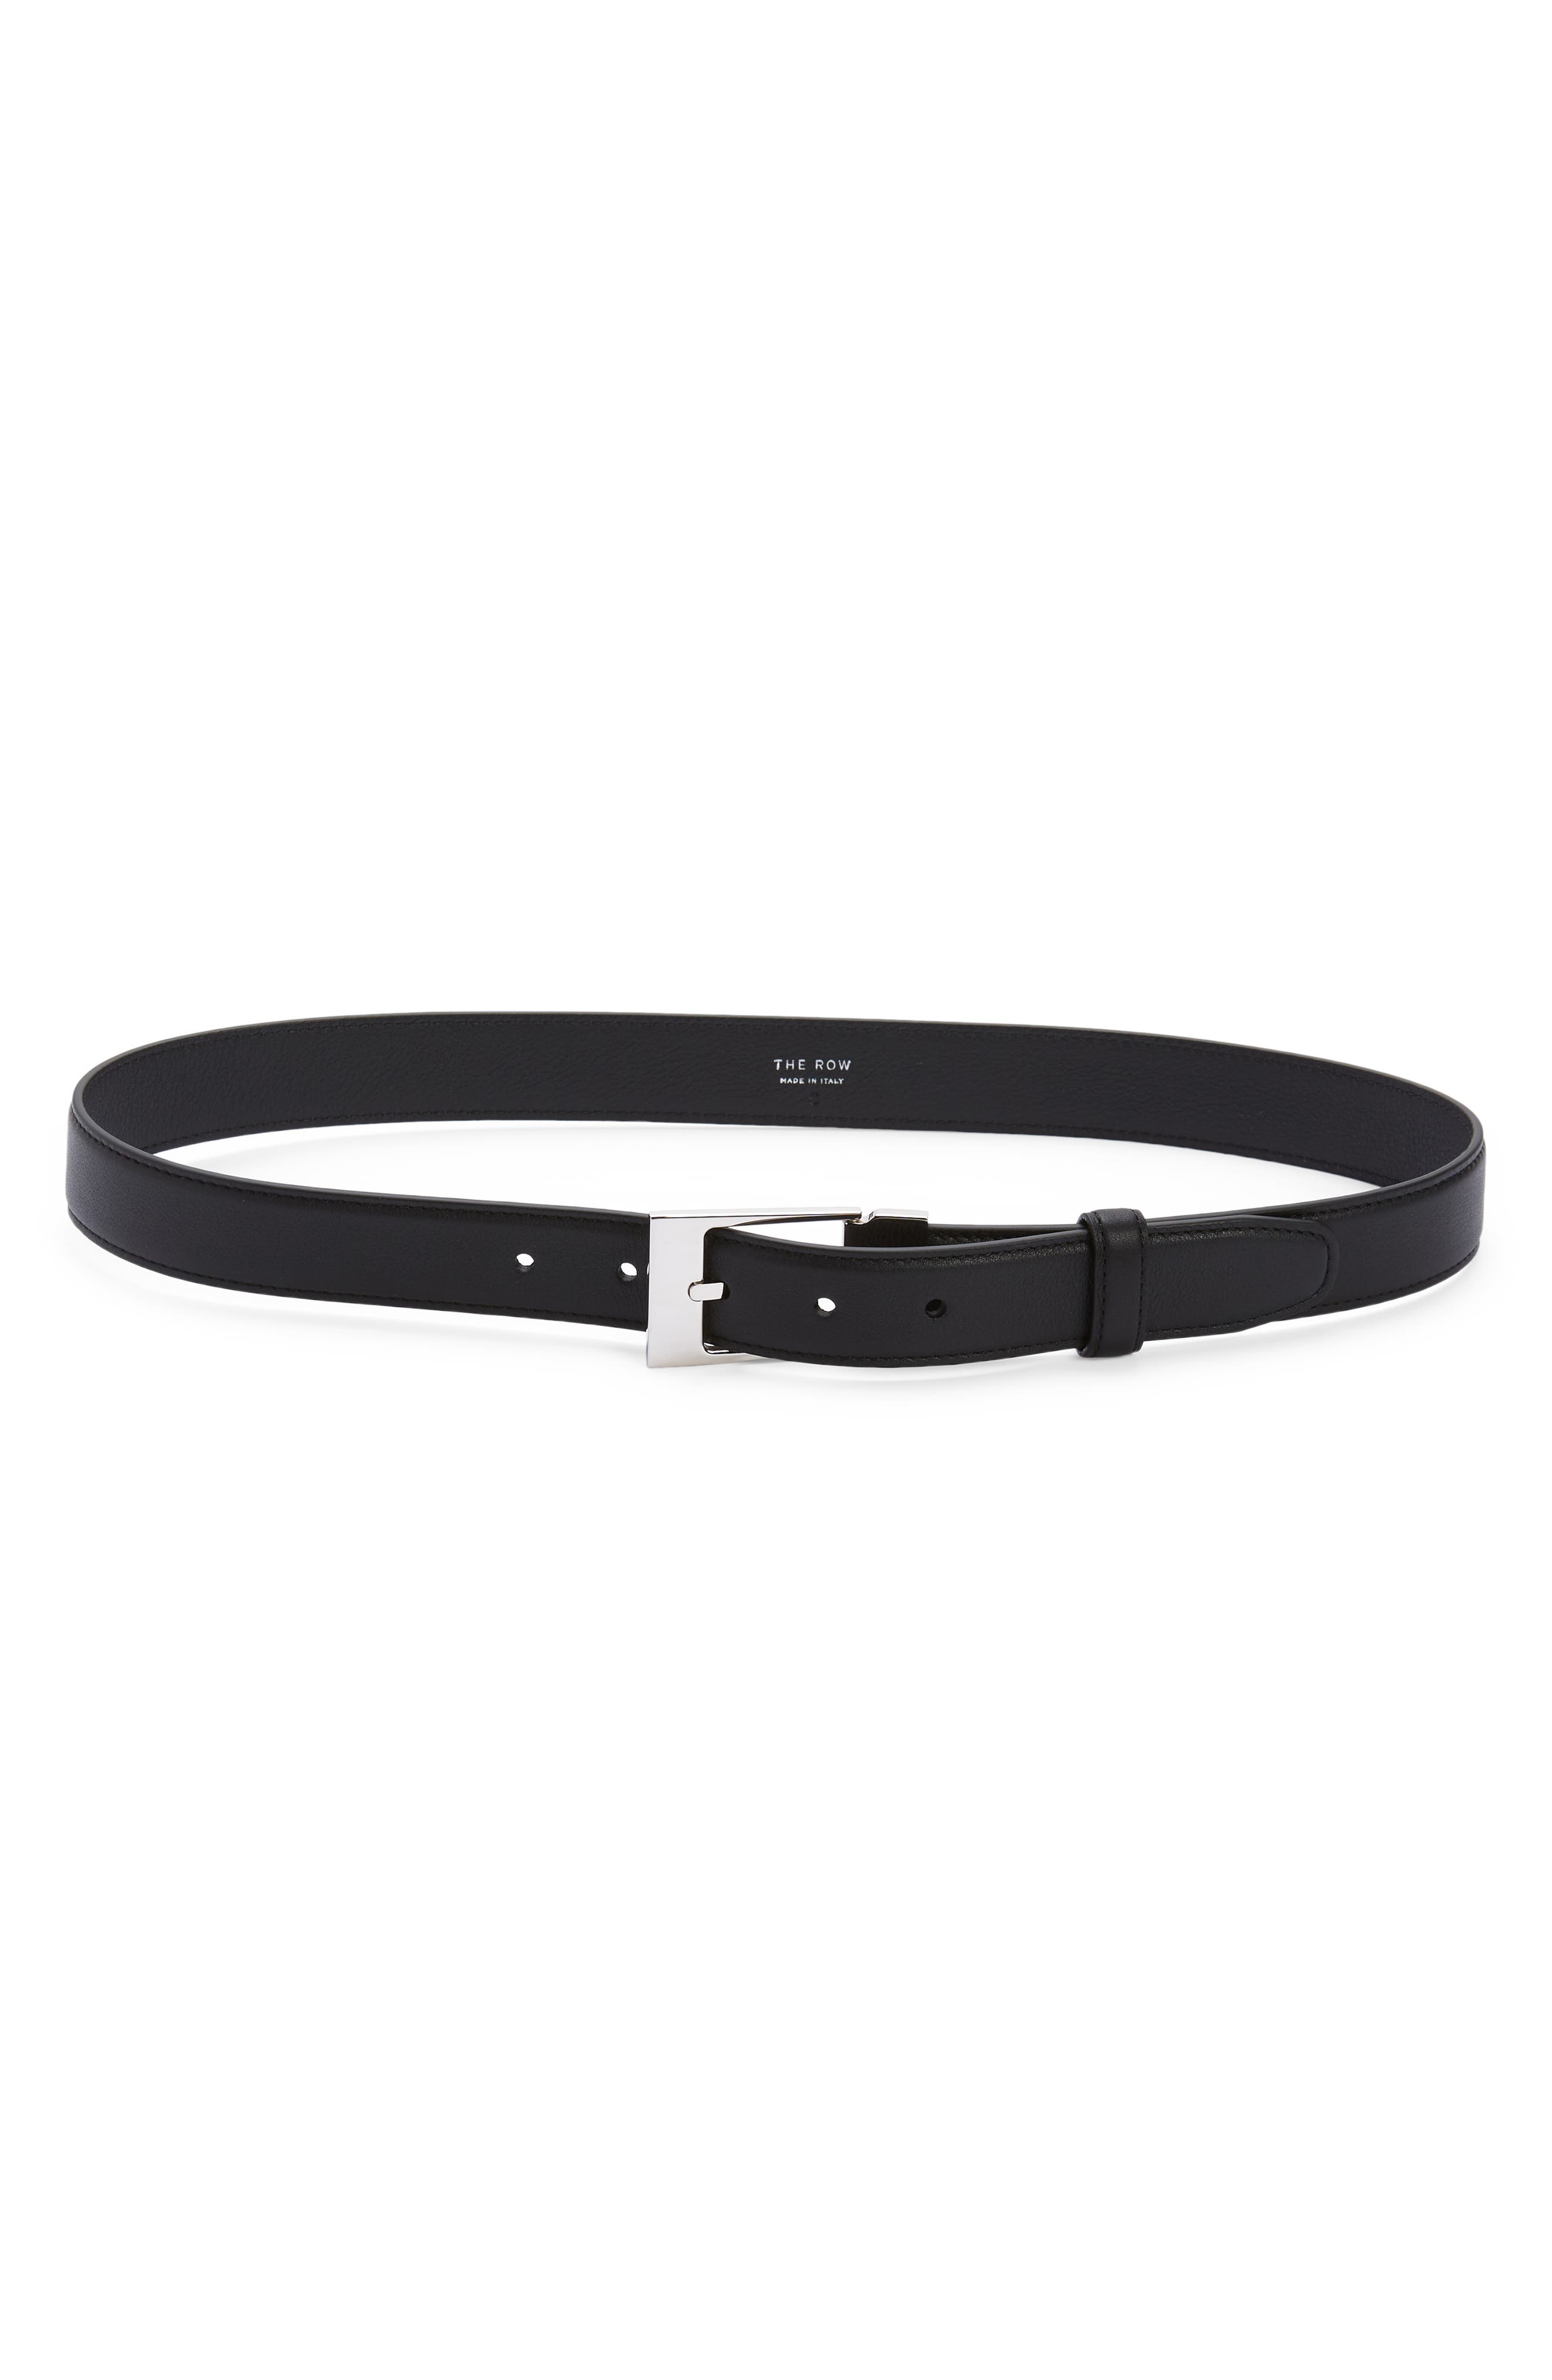 The Row Jewel Leather Belt in Black Plaid